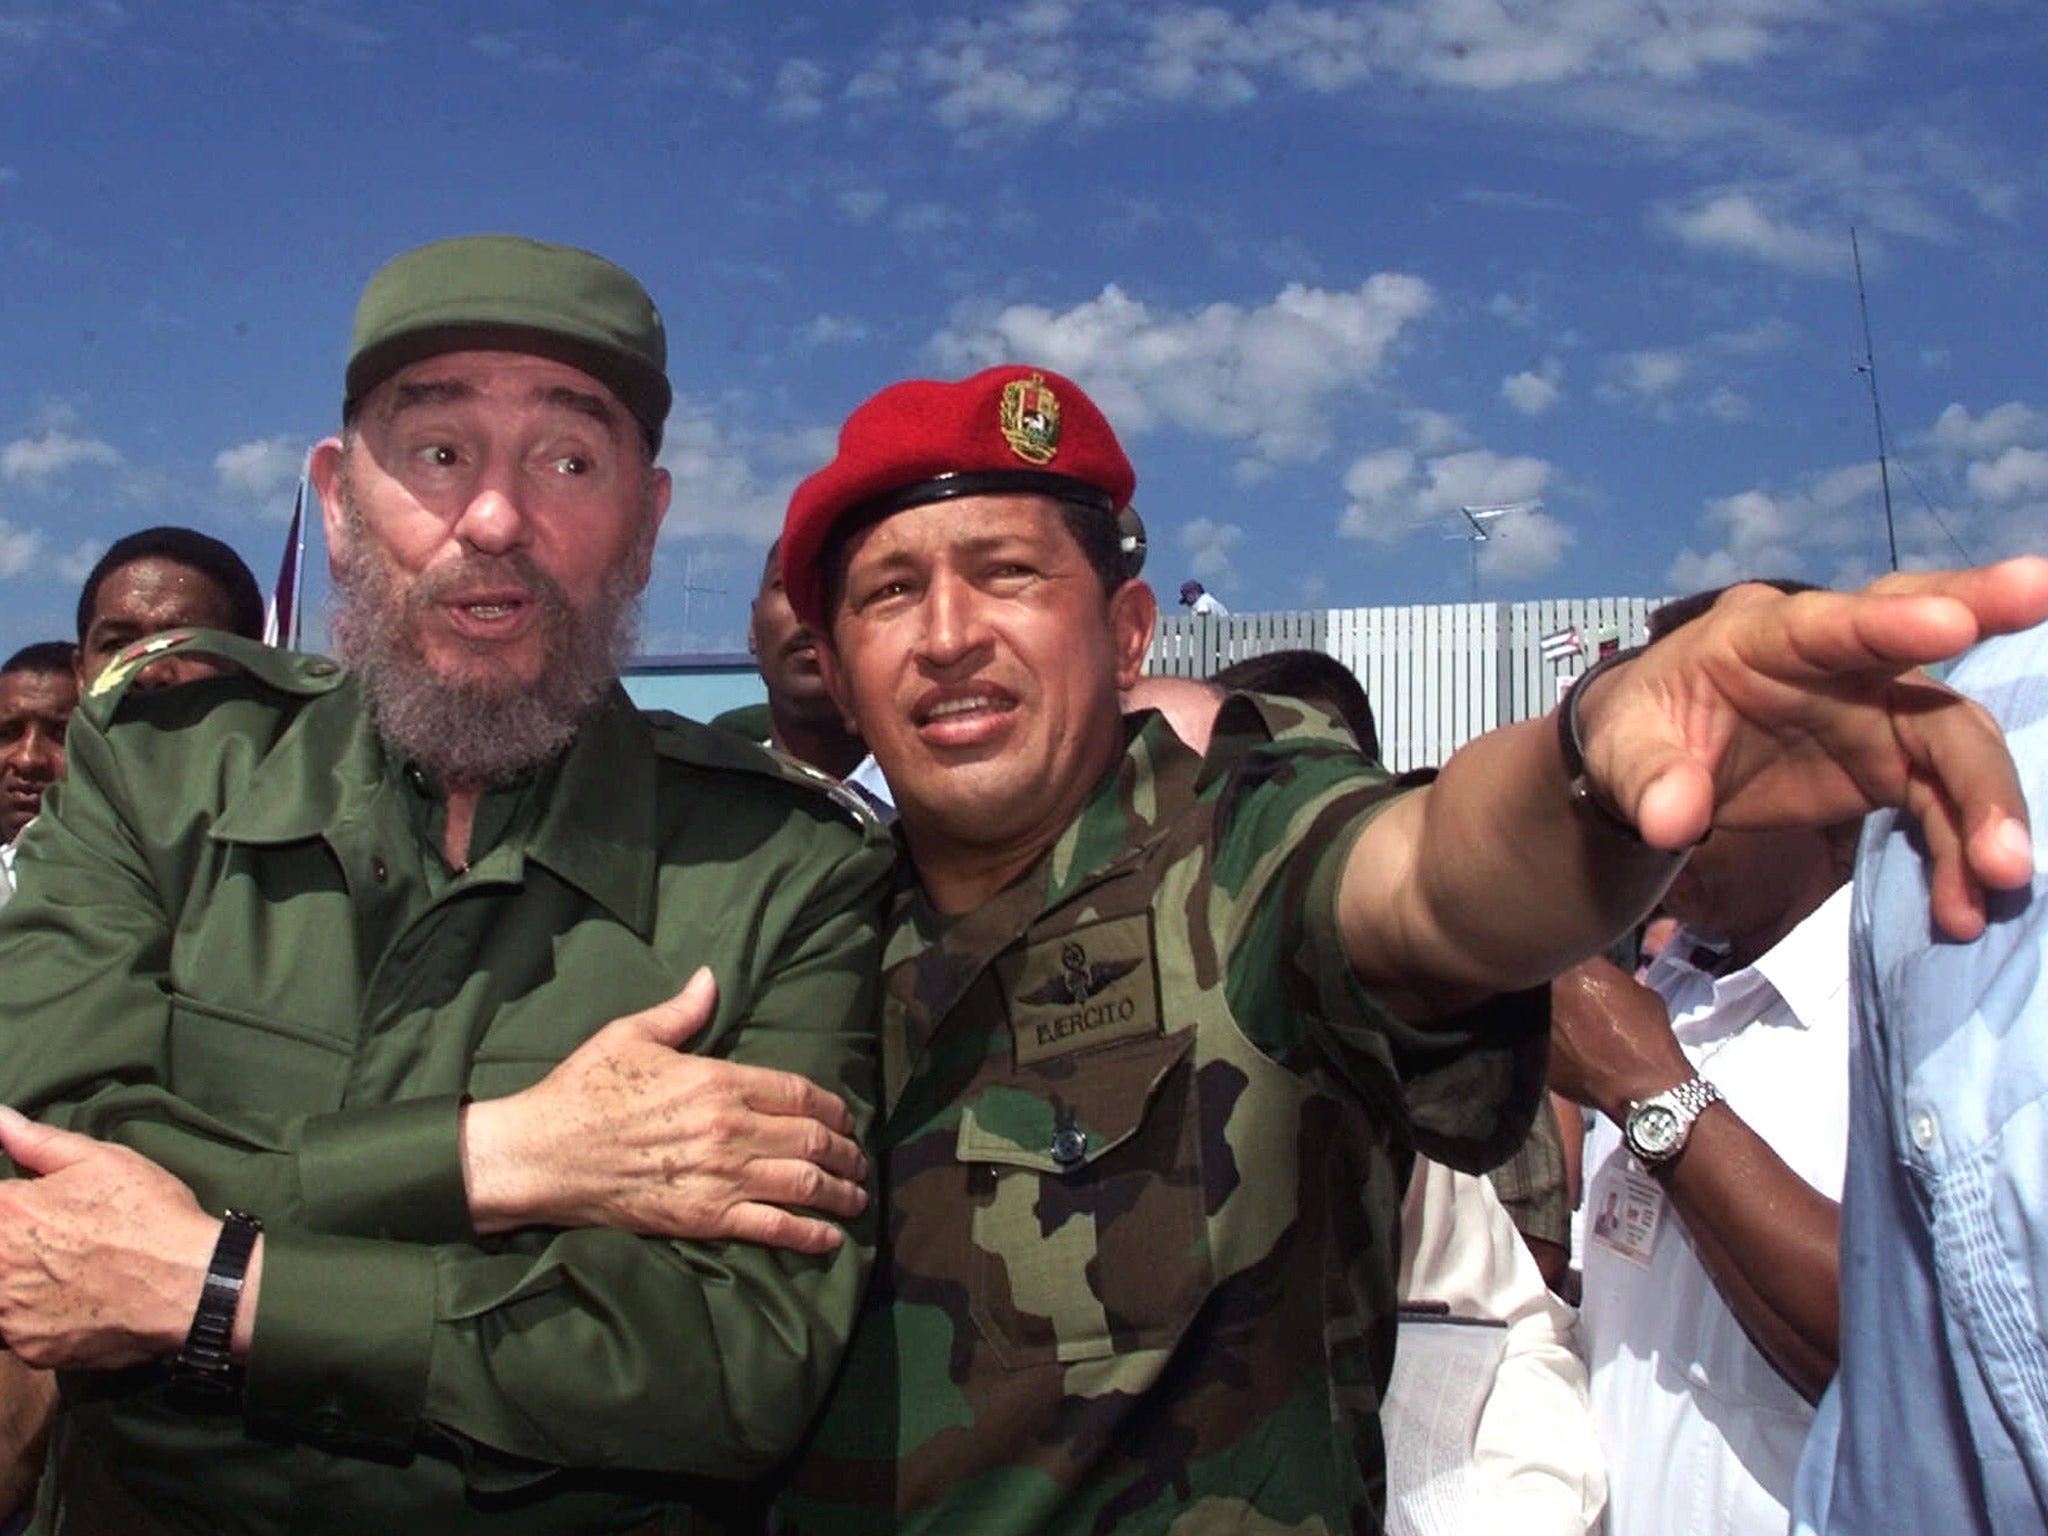 Chavez with his ally, the former Cuban leader Fidel Castro